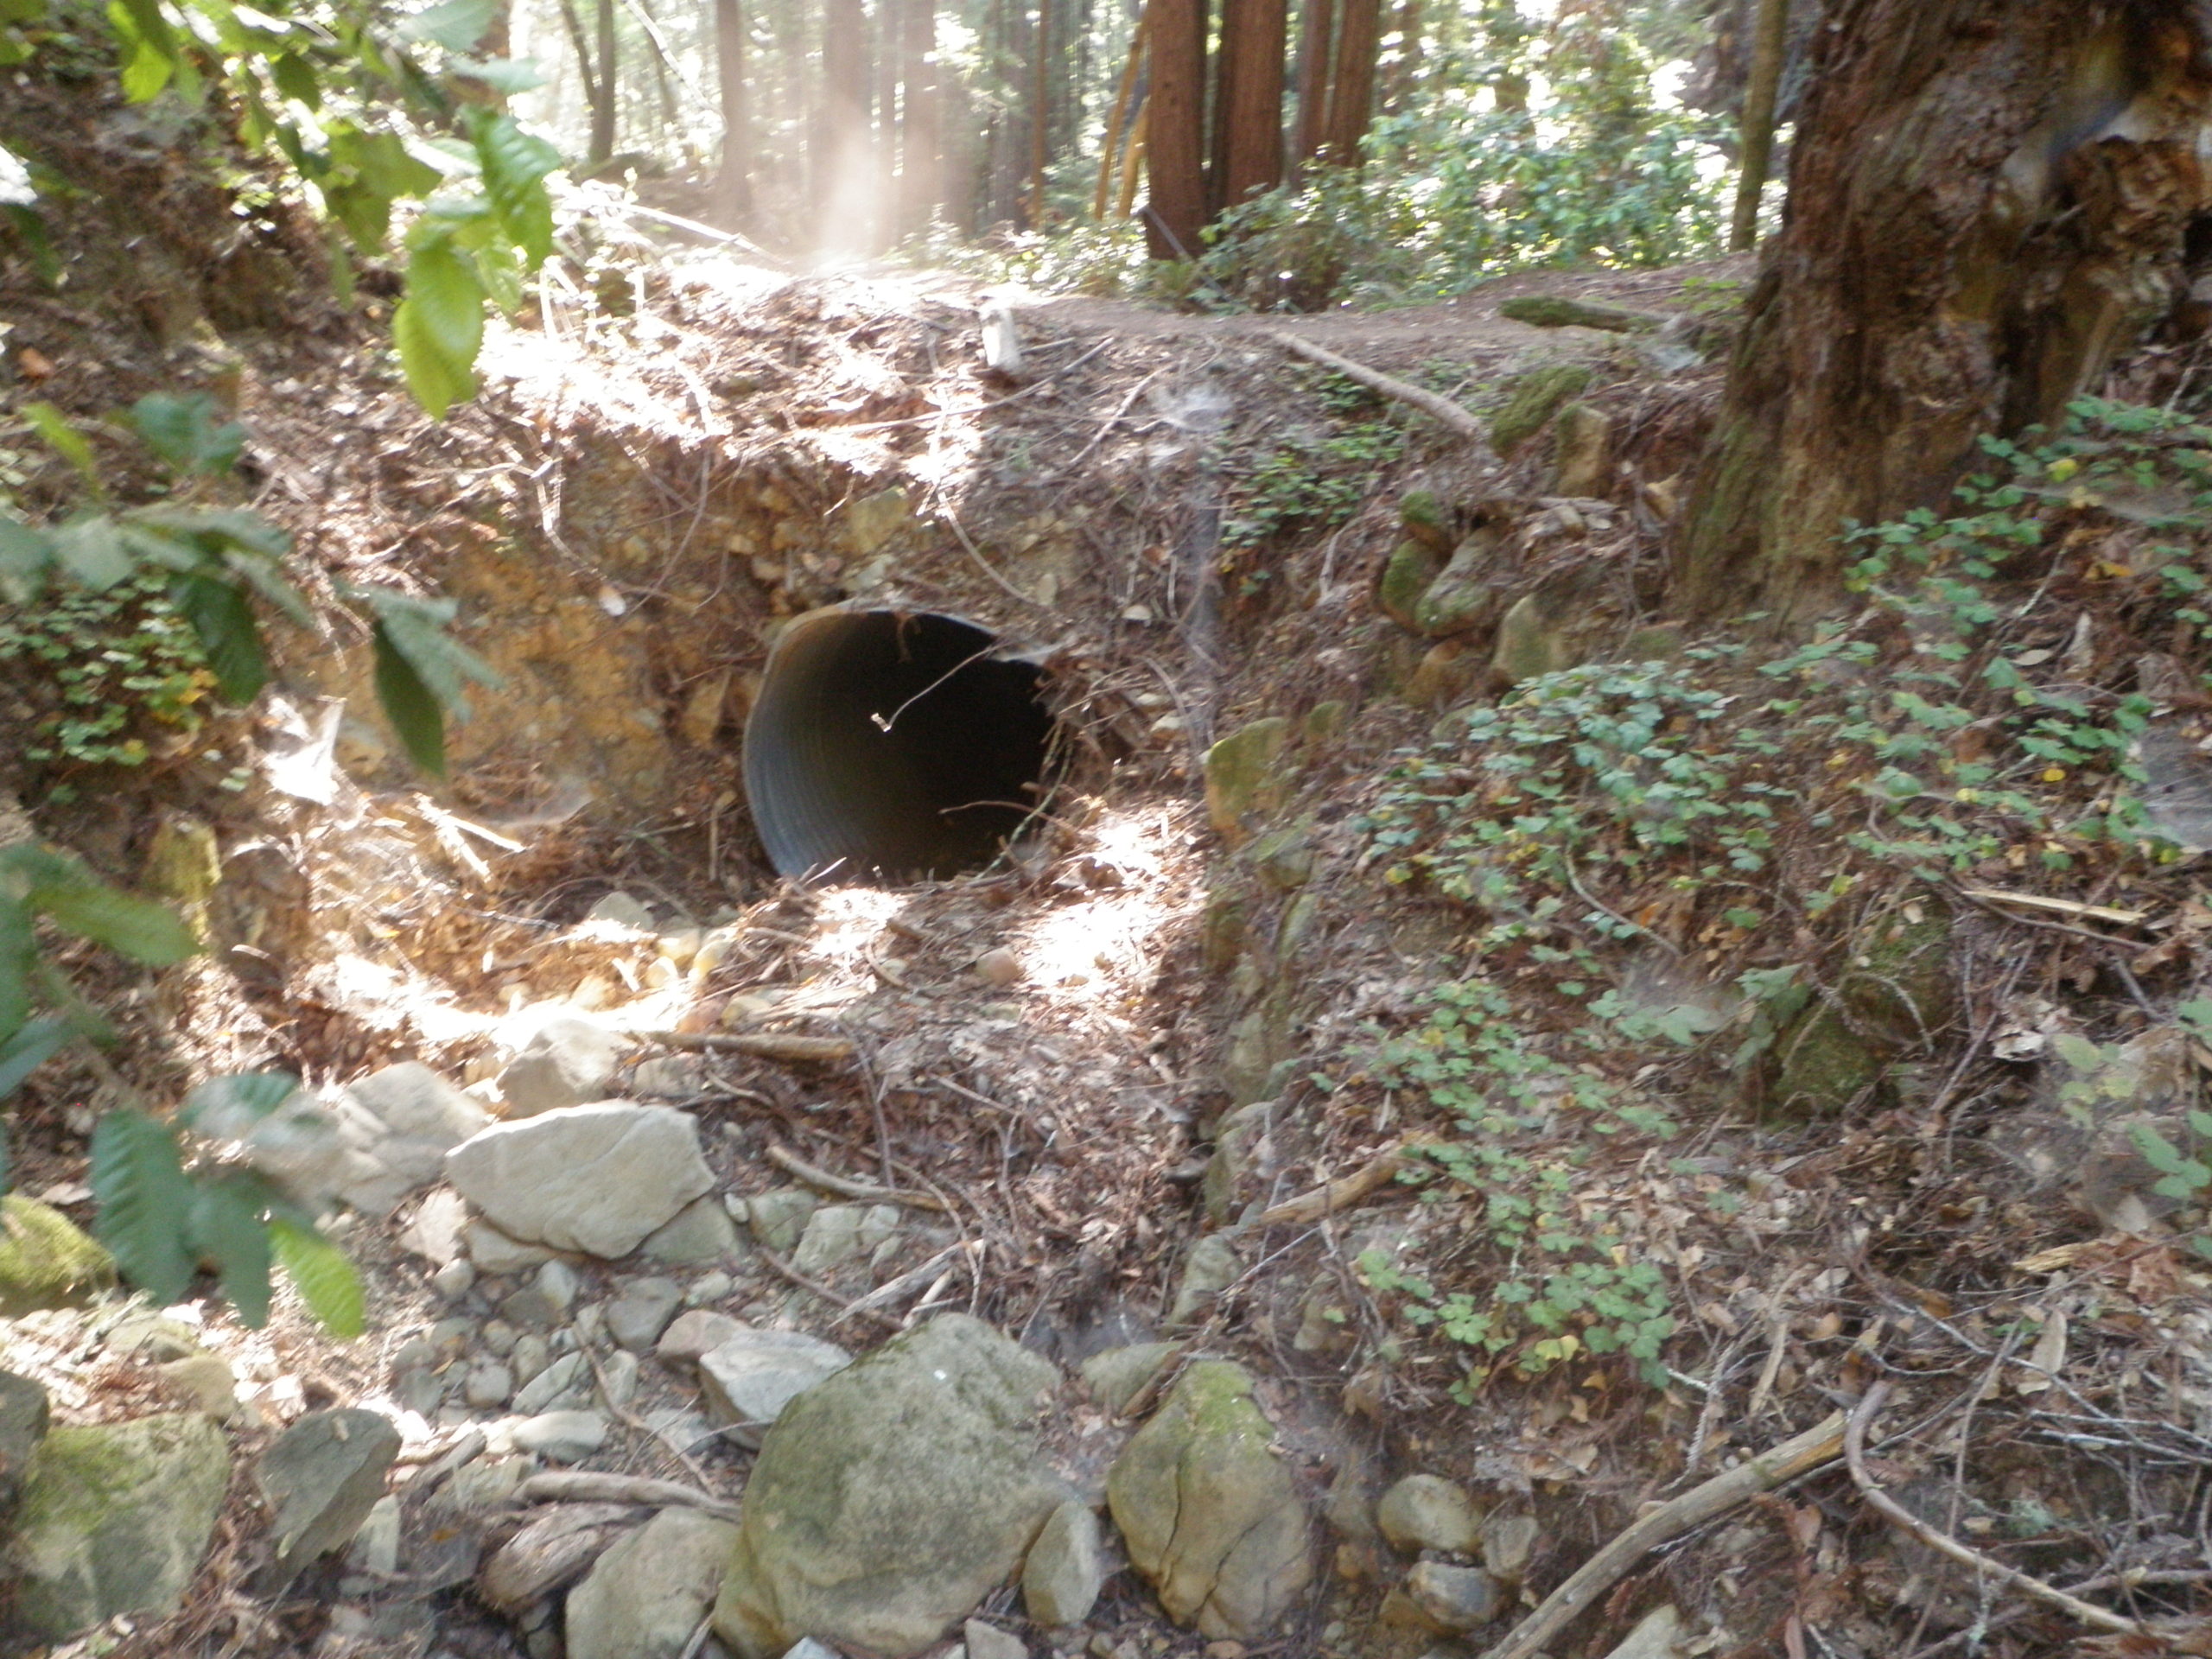  A dirt road has a culvert under it, which seems dilapidated. 